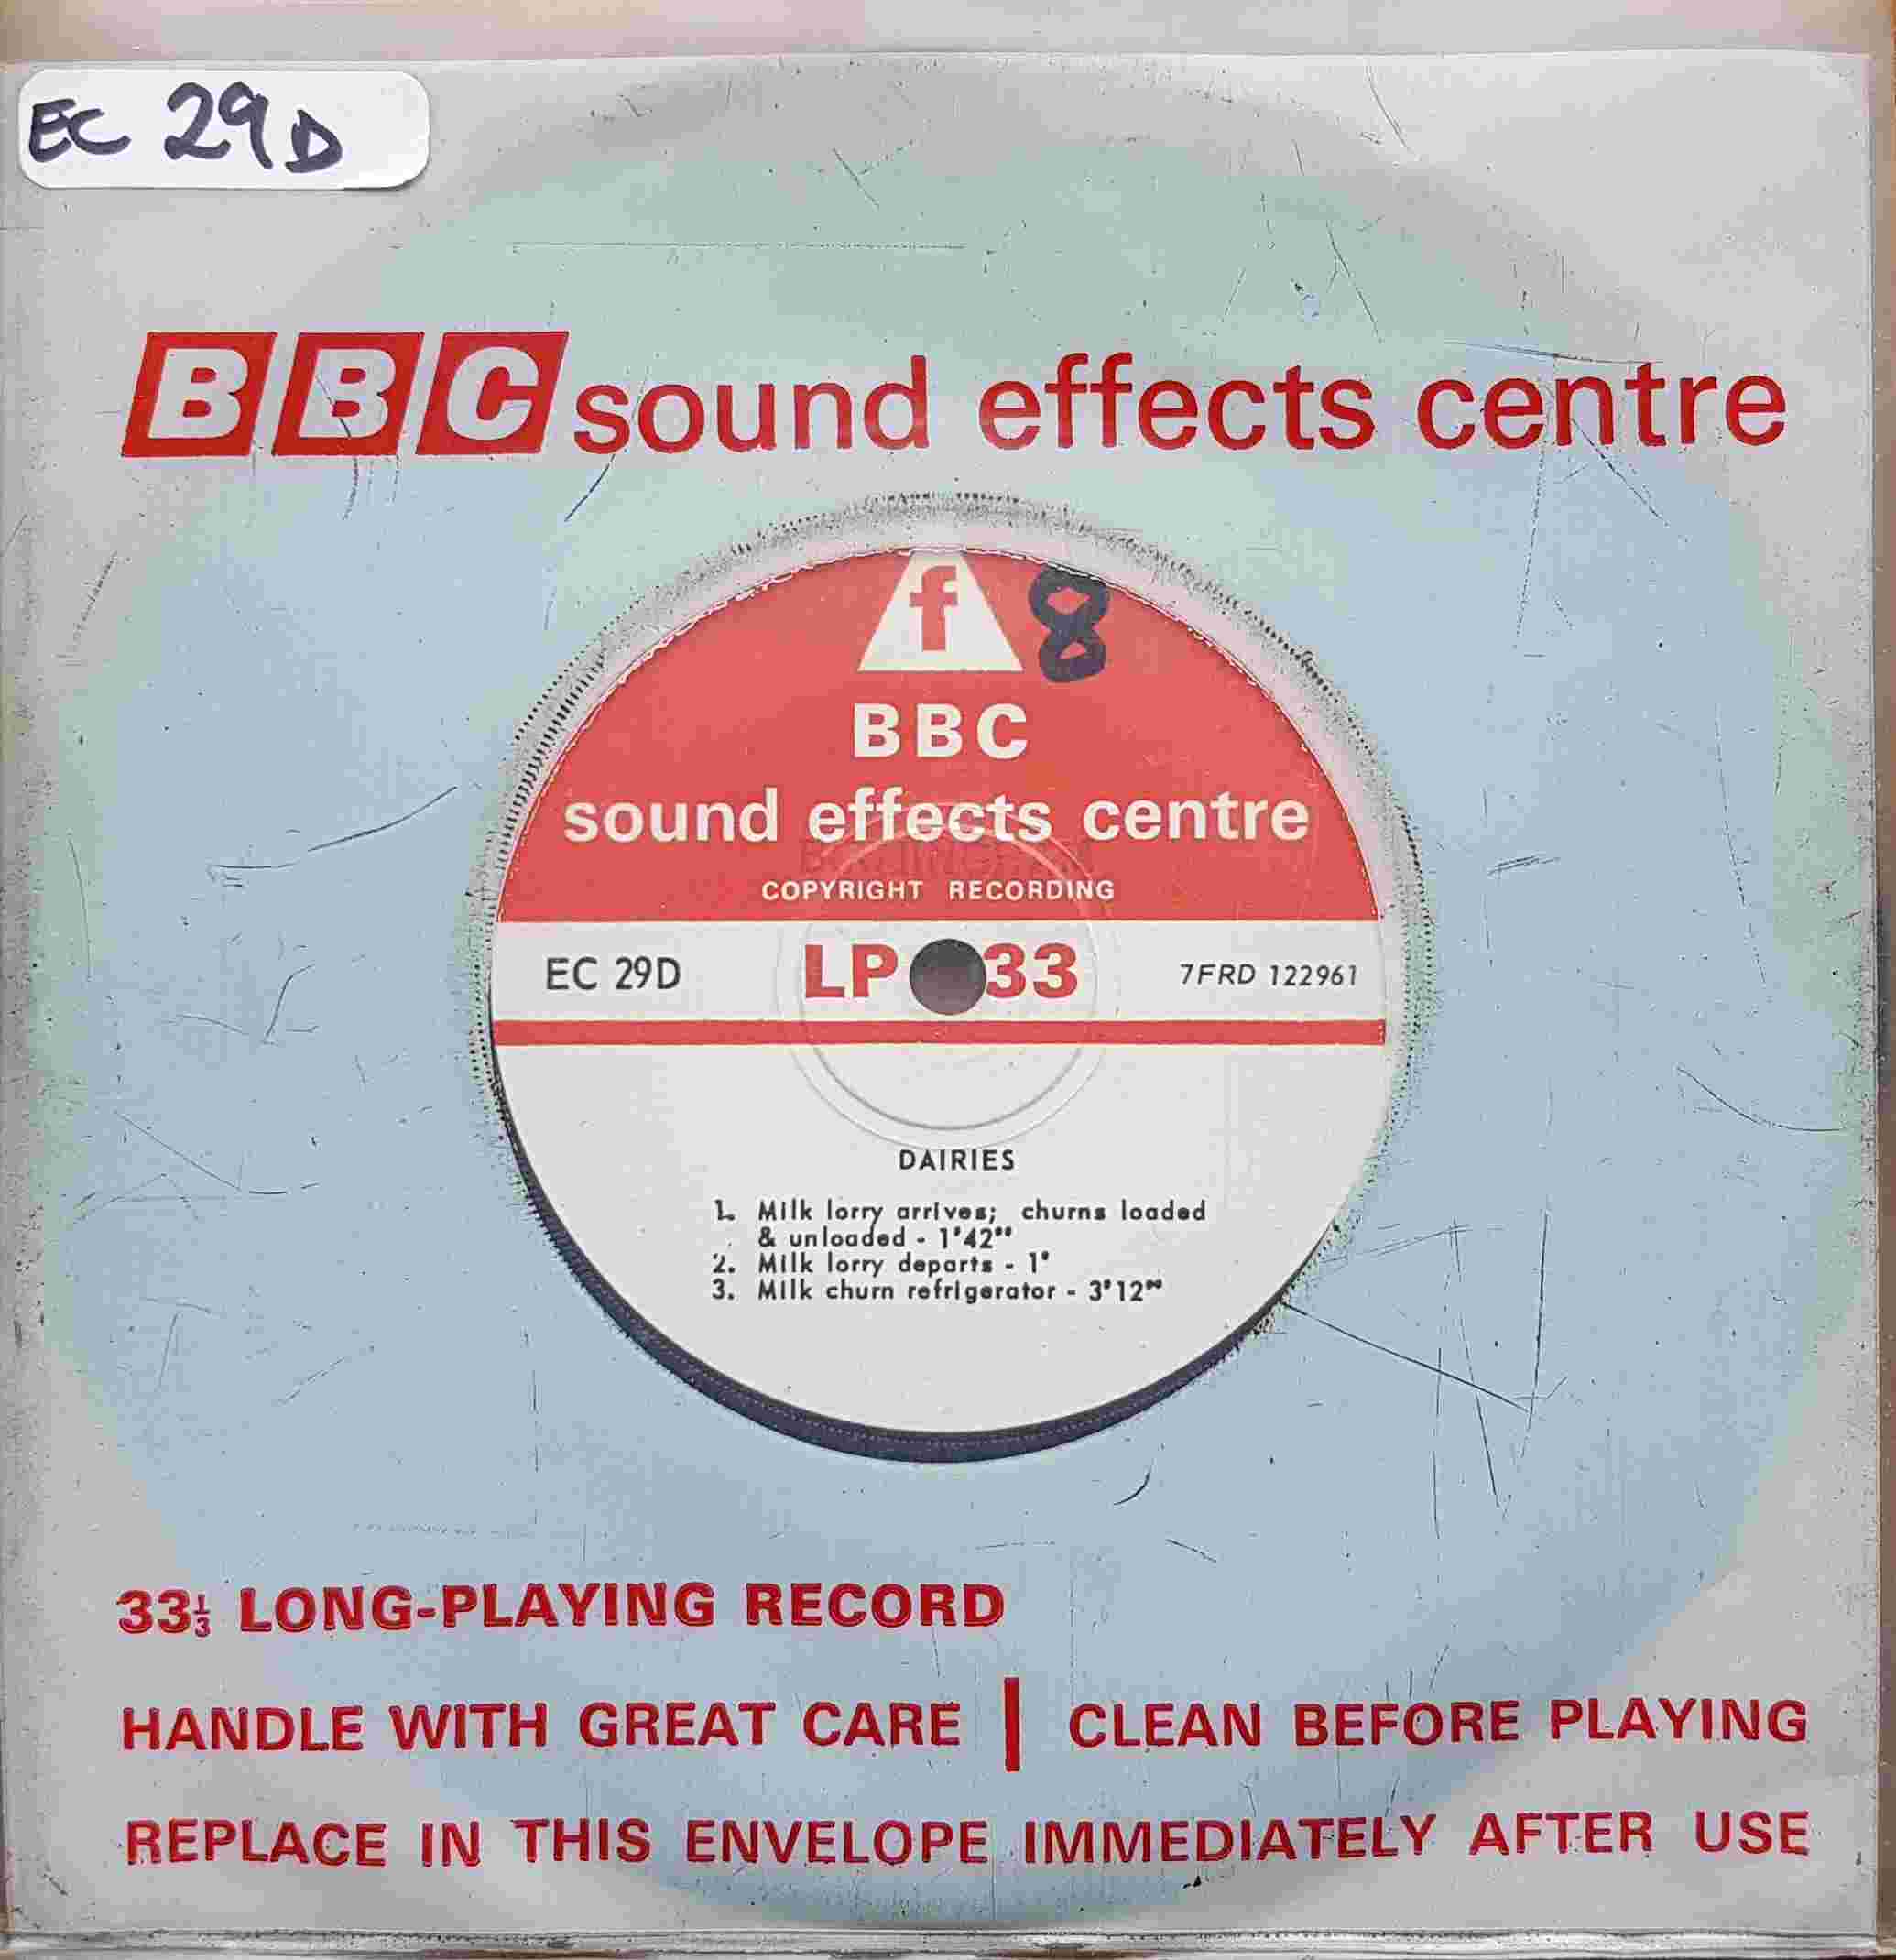 Picture of EC 29D Dairies by artist Not registered from the BBC singles - Records and Tapes library